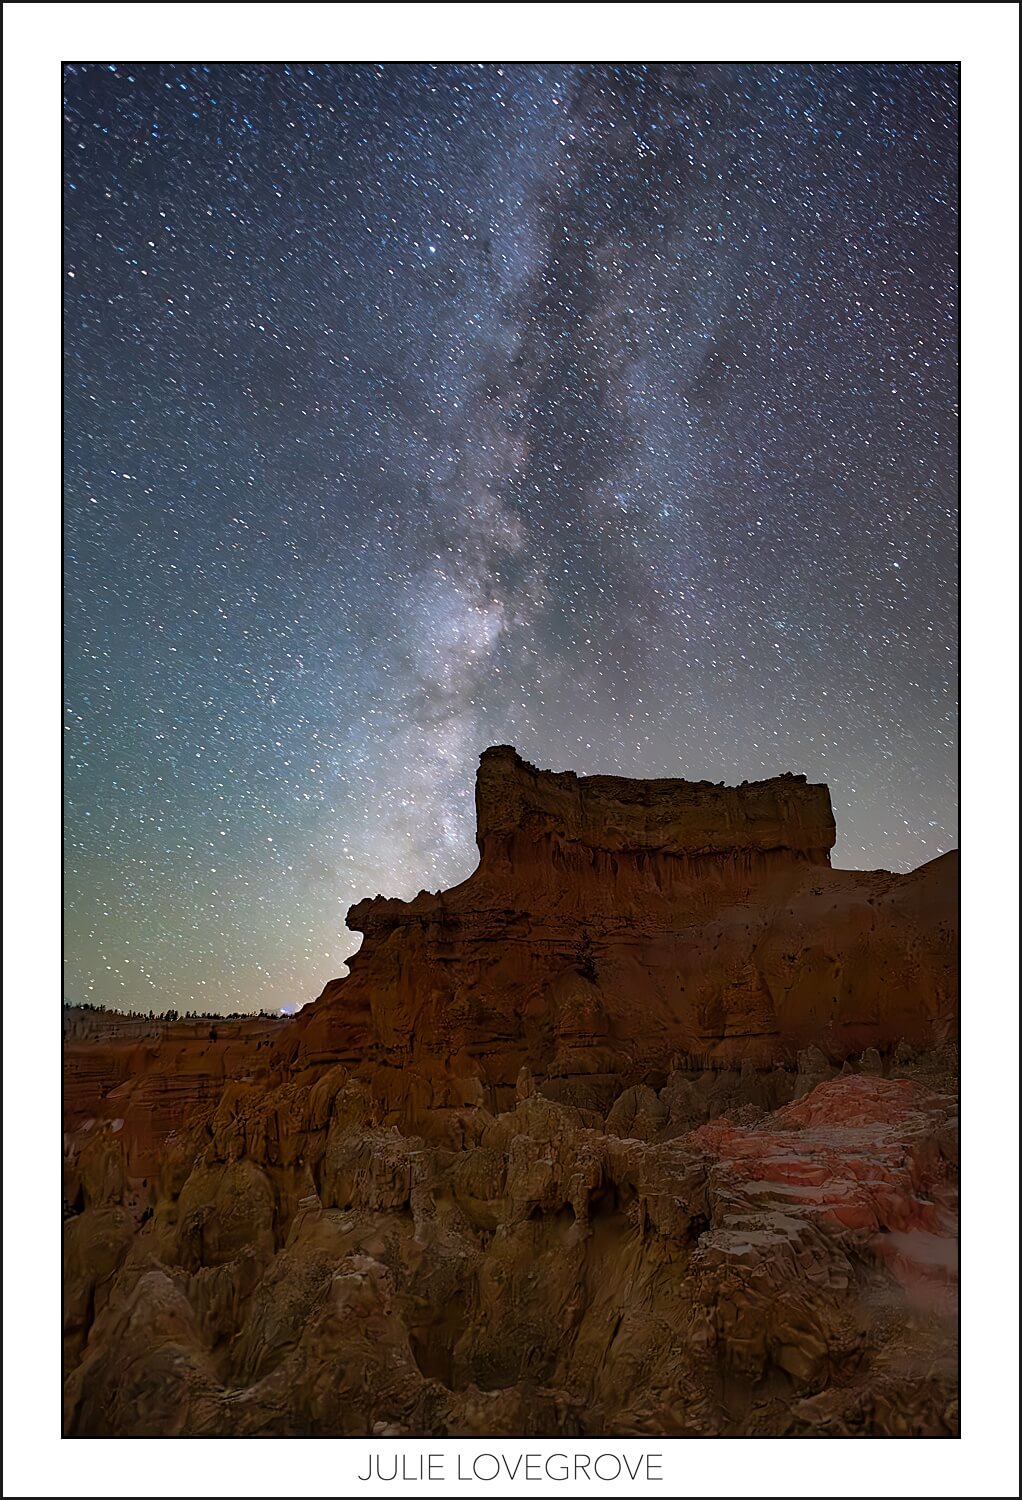 The Milky Way over Bryce Canyon